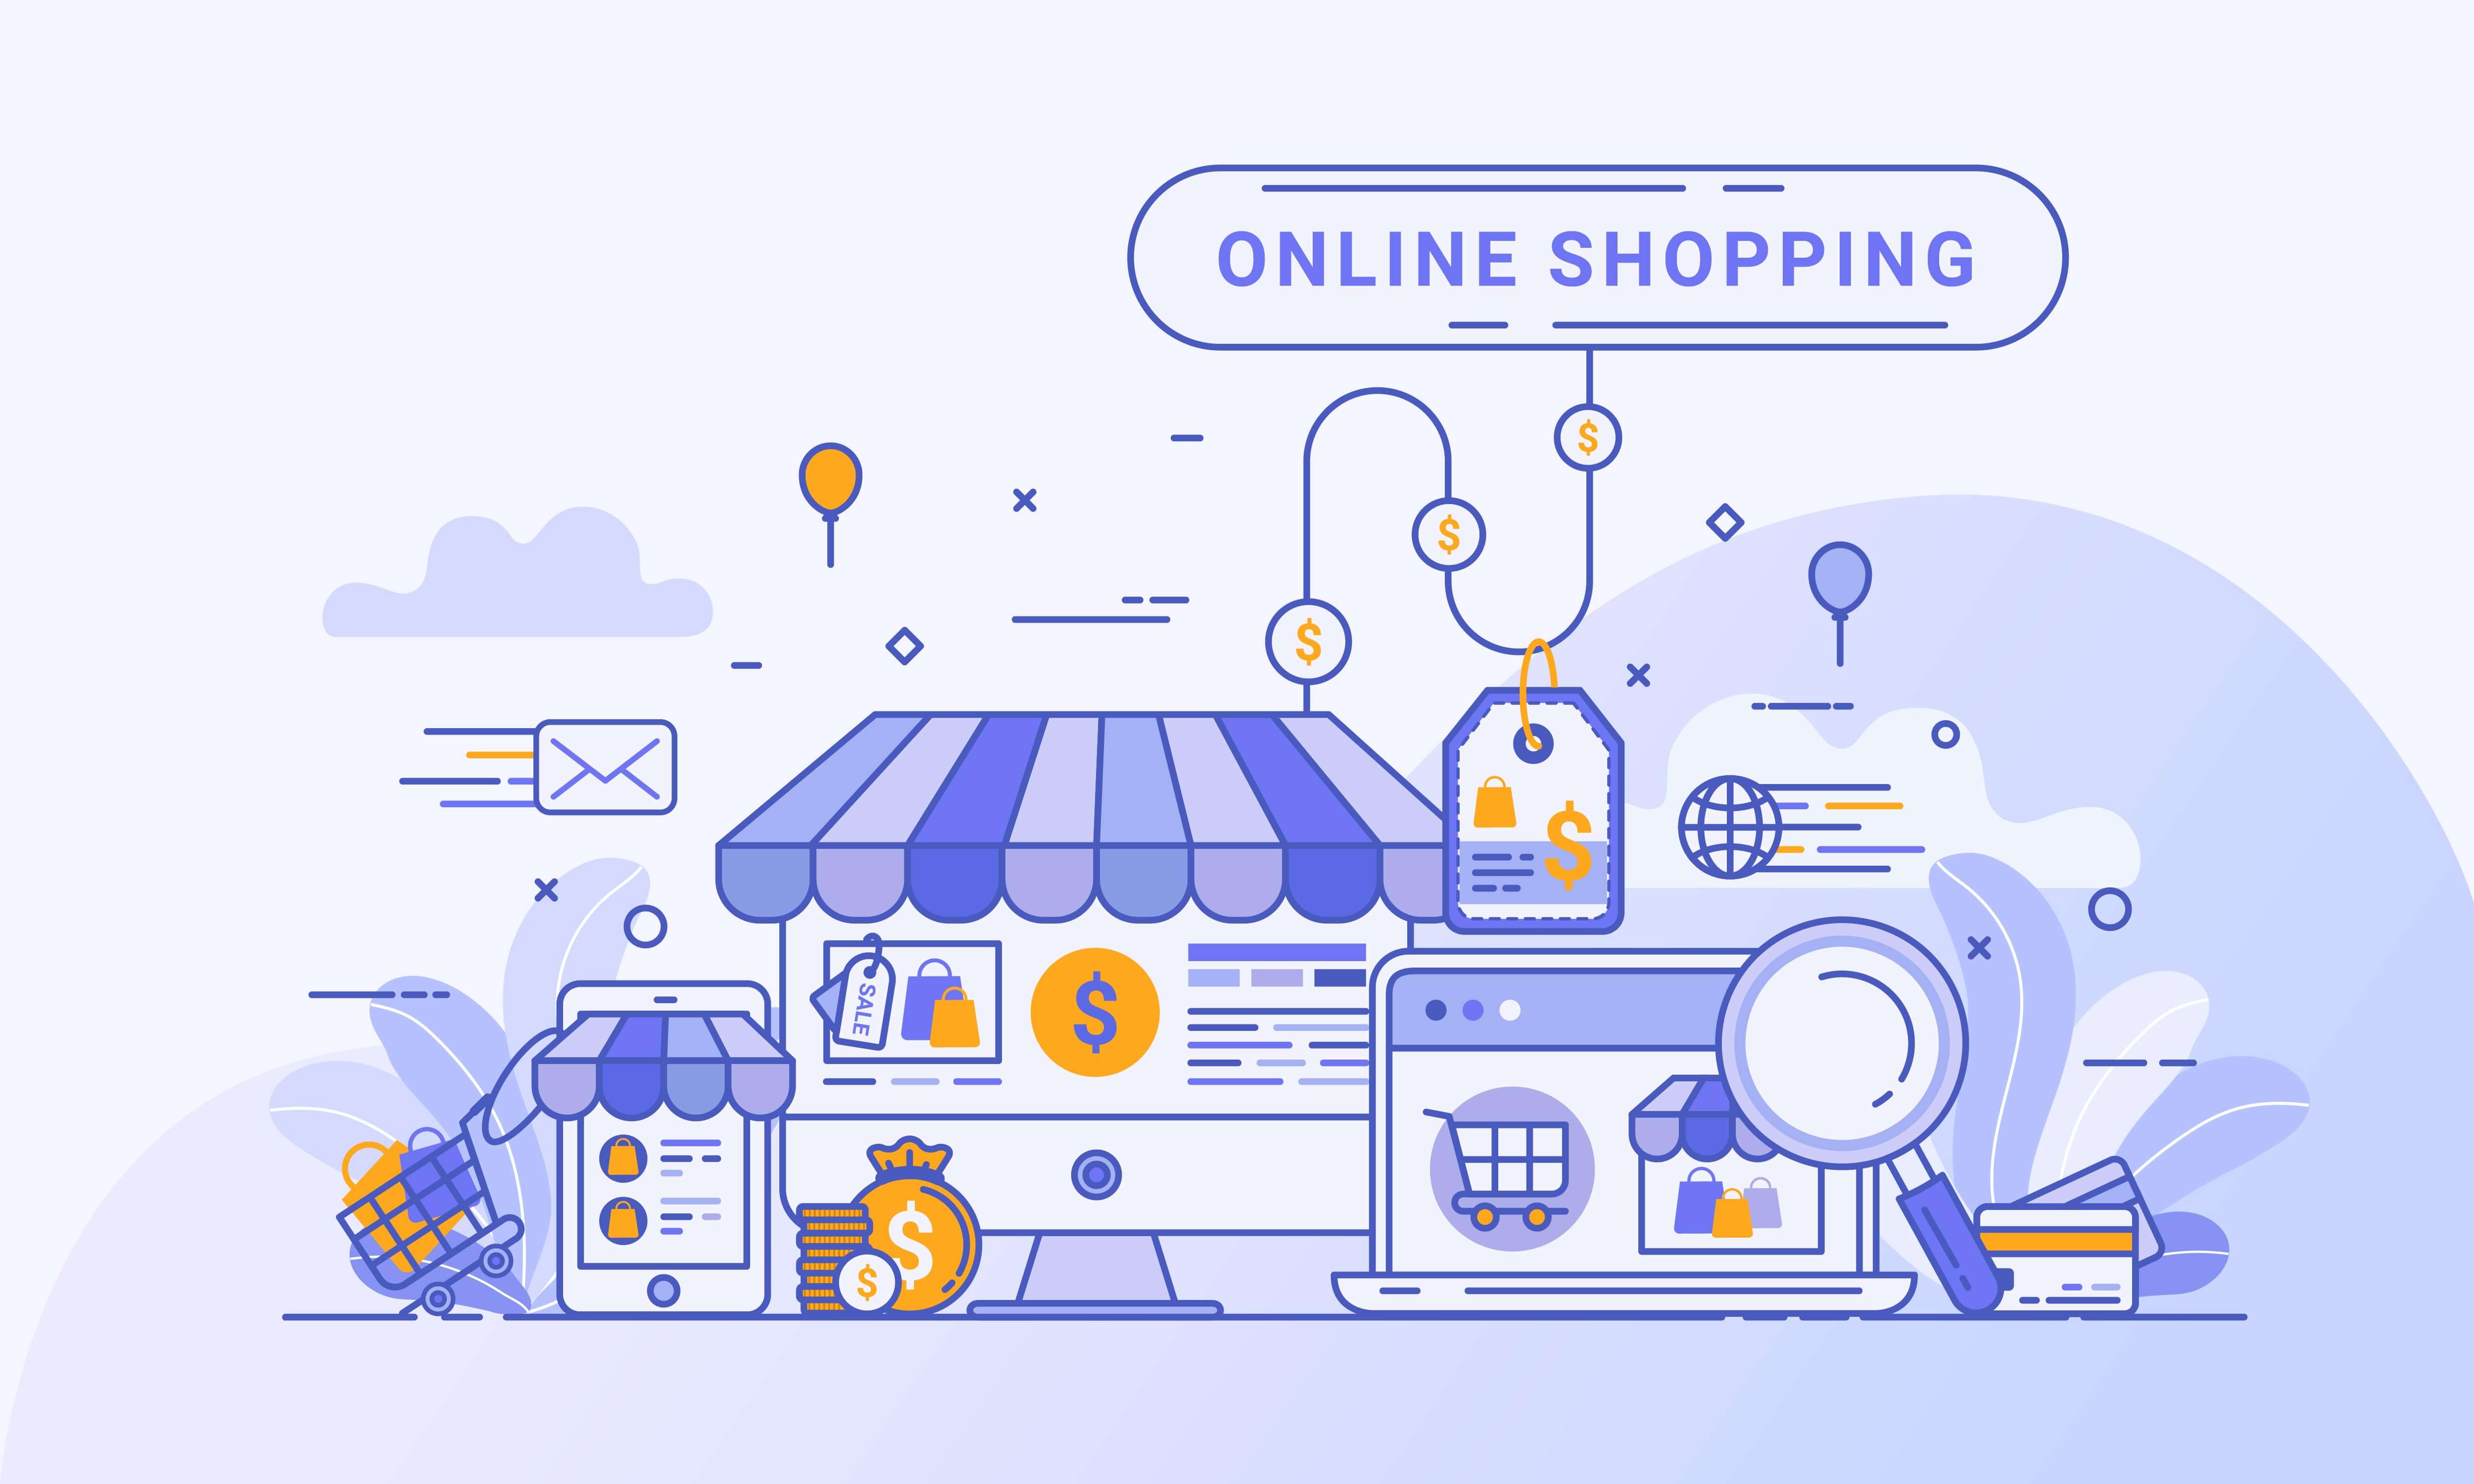 ECommerce Business Development: How to Develop and Promote eCommerce Website?